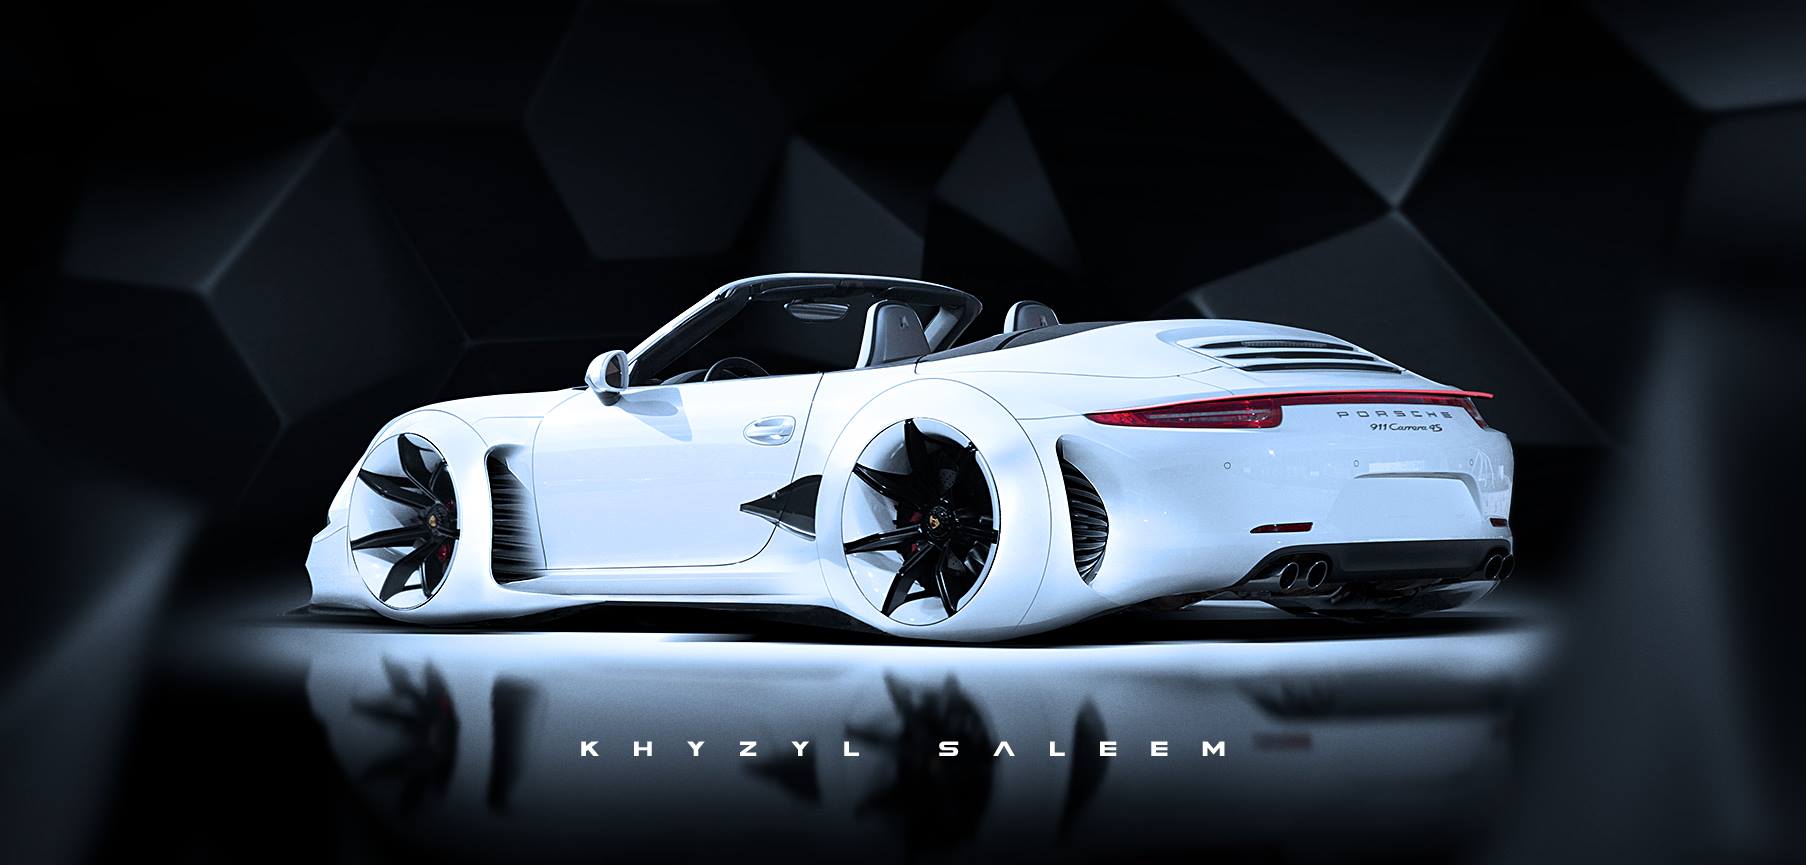 tumbler car Cabriolet 911 Lookalike into Turned RSQ Porsche Audi That